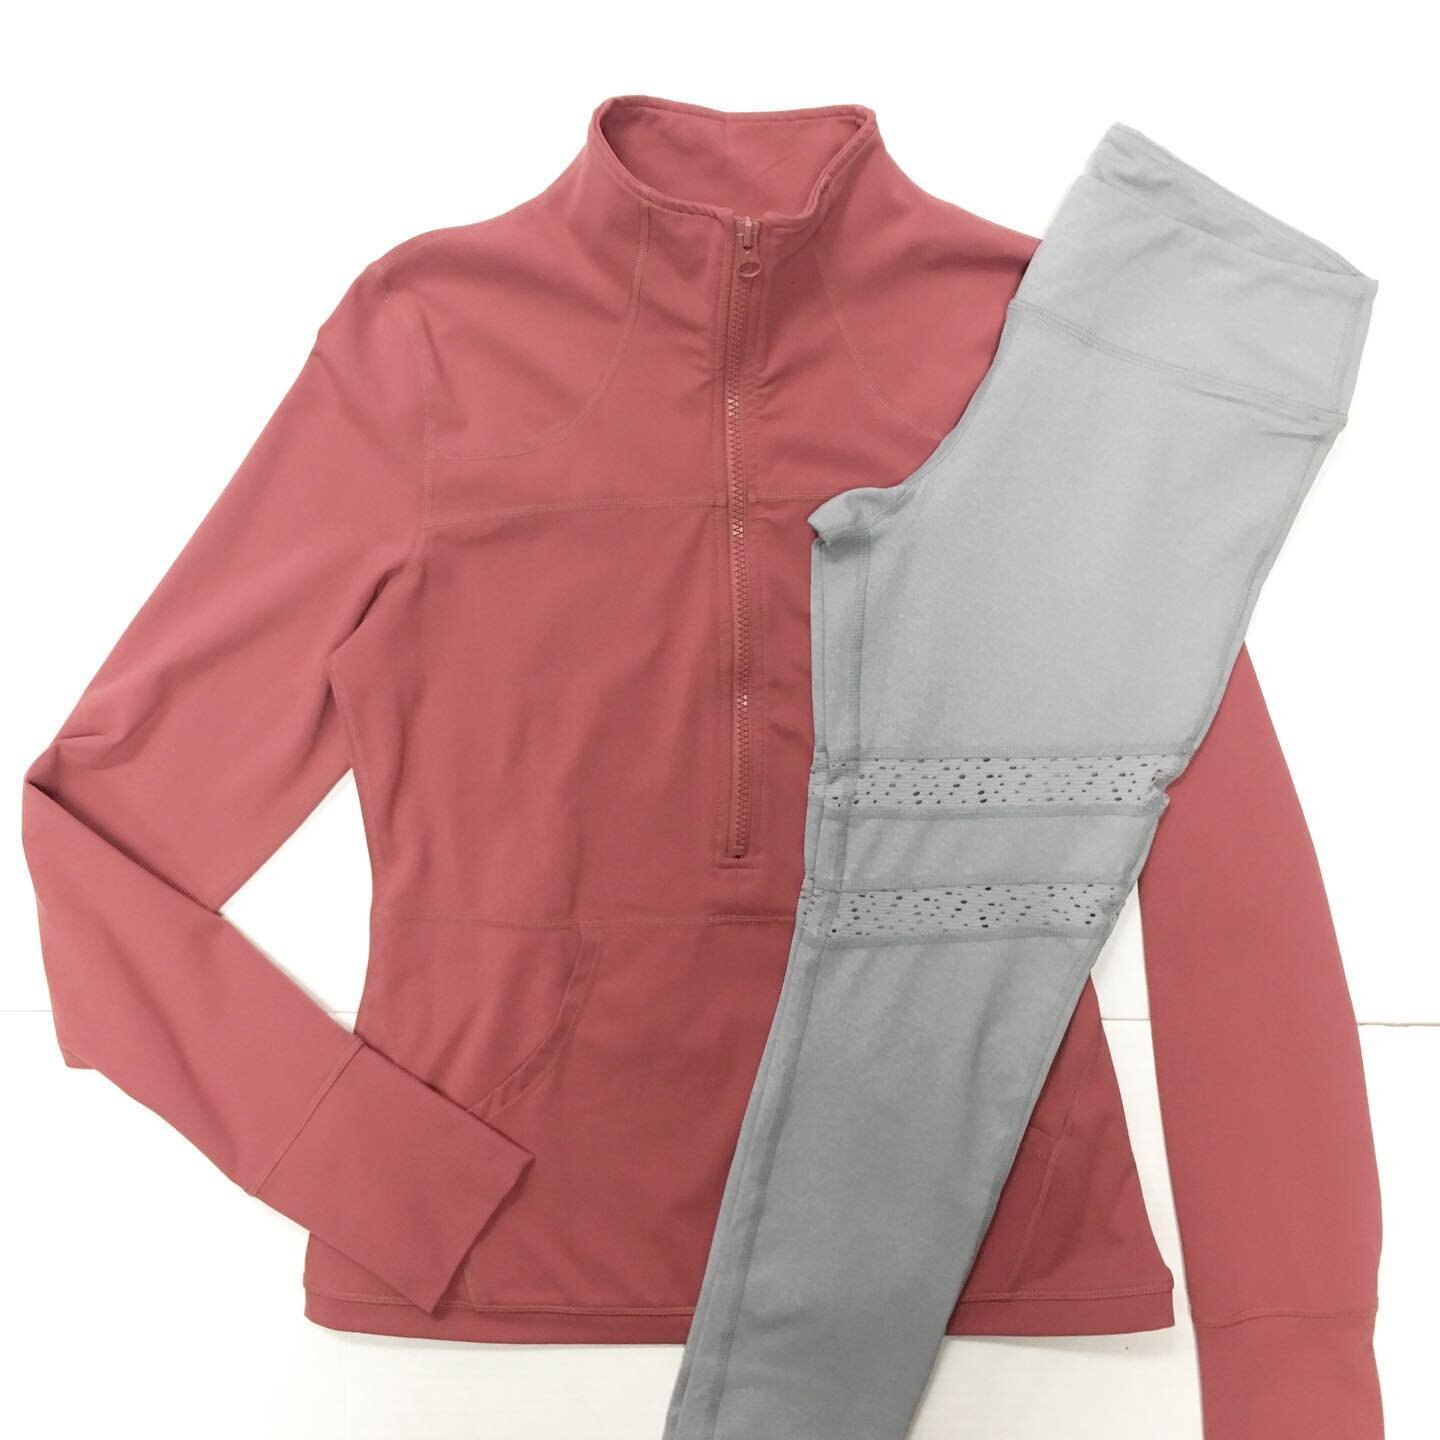 Get your yoga on! 

Zyia Salmon Pocket 1/2 Zip Pullover Medium $35
Tonic Crops Small $30

#wildflowersconsignmentboutique #consignmentboutique #consignmentfinds #womensclothing #secondhandstyle #relove #preloved #sustainablestyle #zyiaactive #tonicac